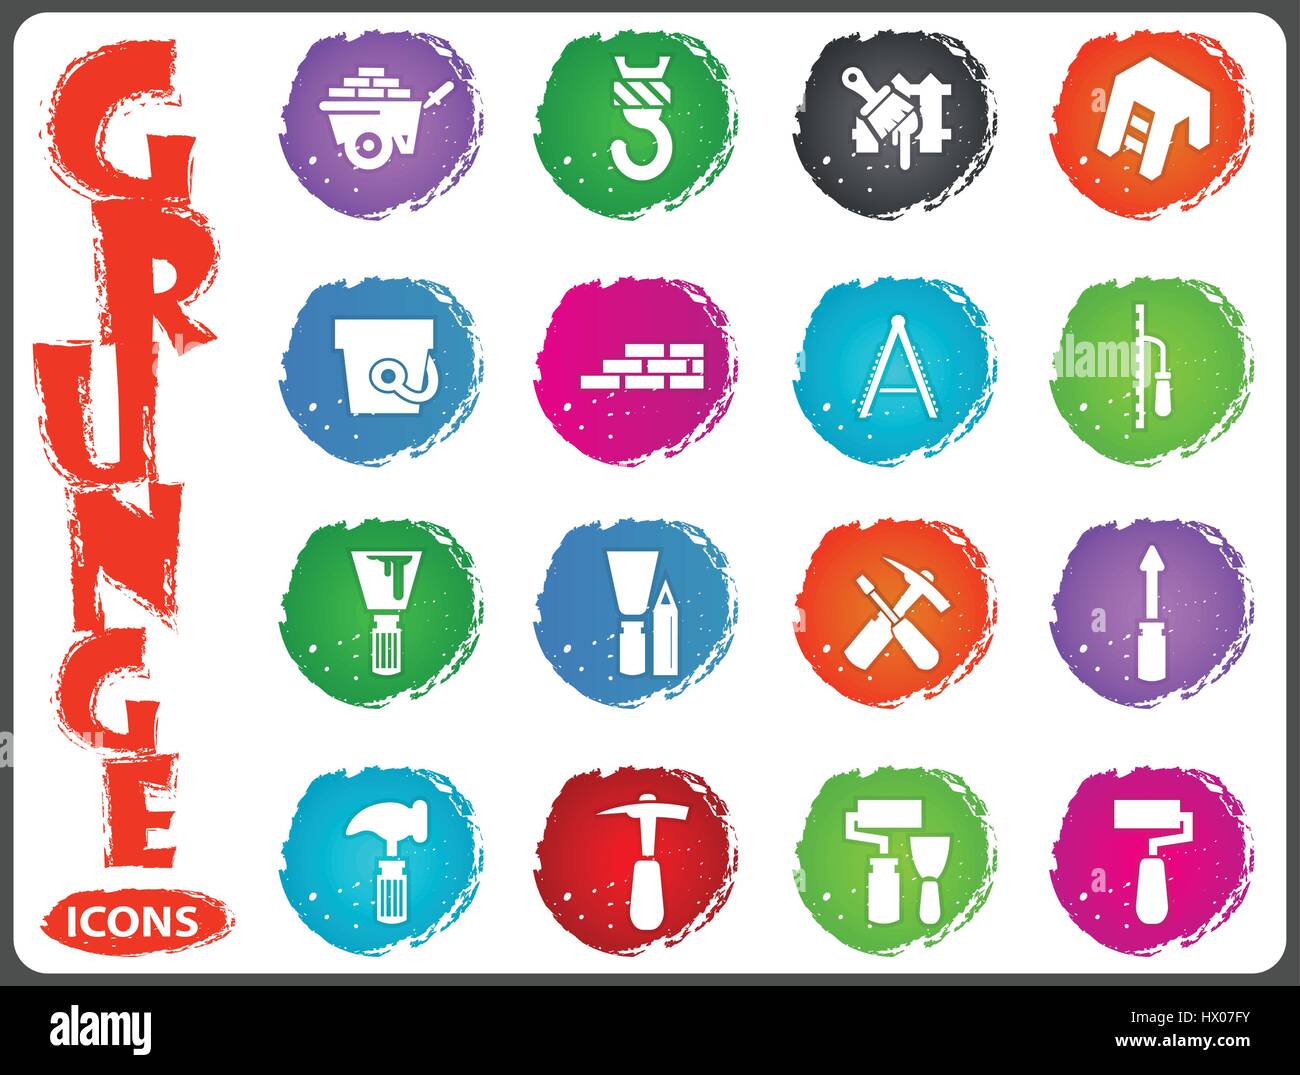 Work tools icon set for web sites and user interface in grunge style Stock Vector